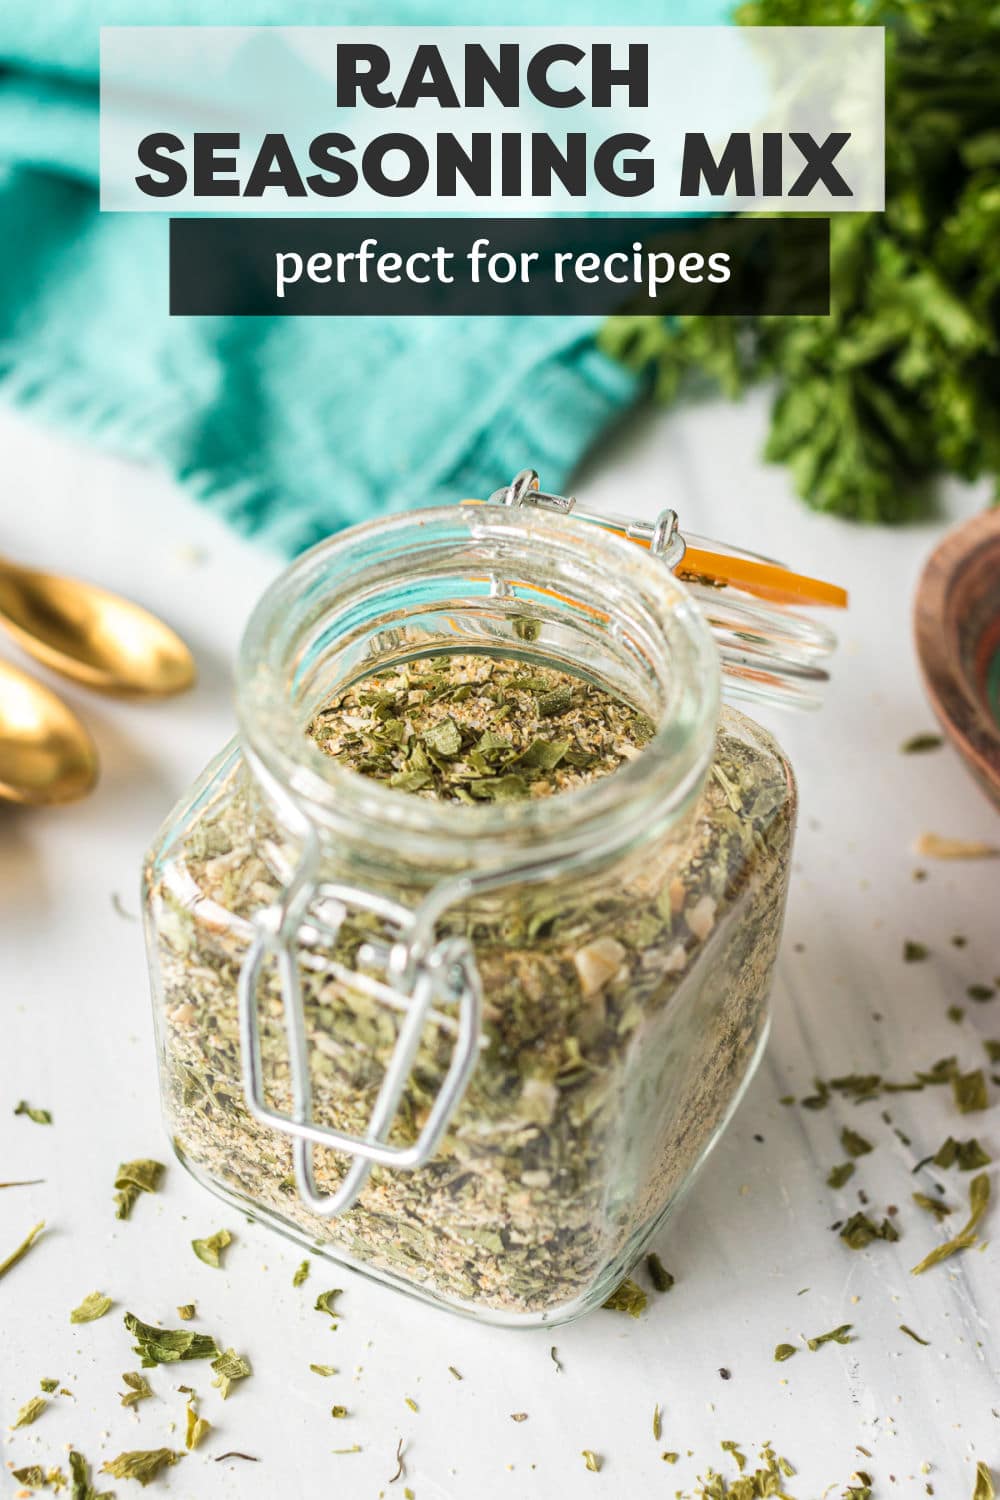 Homemade ranch seasoning mix is perfect for making dressing, dips, or mixing in casseroles. This versatile dry ranch mix is simple to make and can replace the packets you buy in stores. | www.persnicketyplates.com